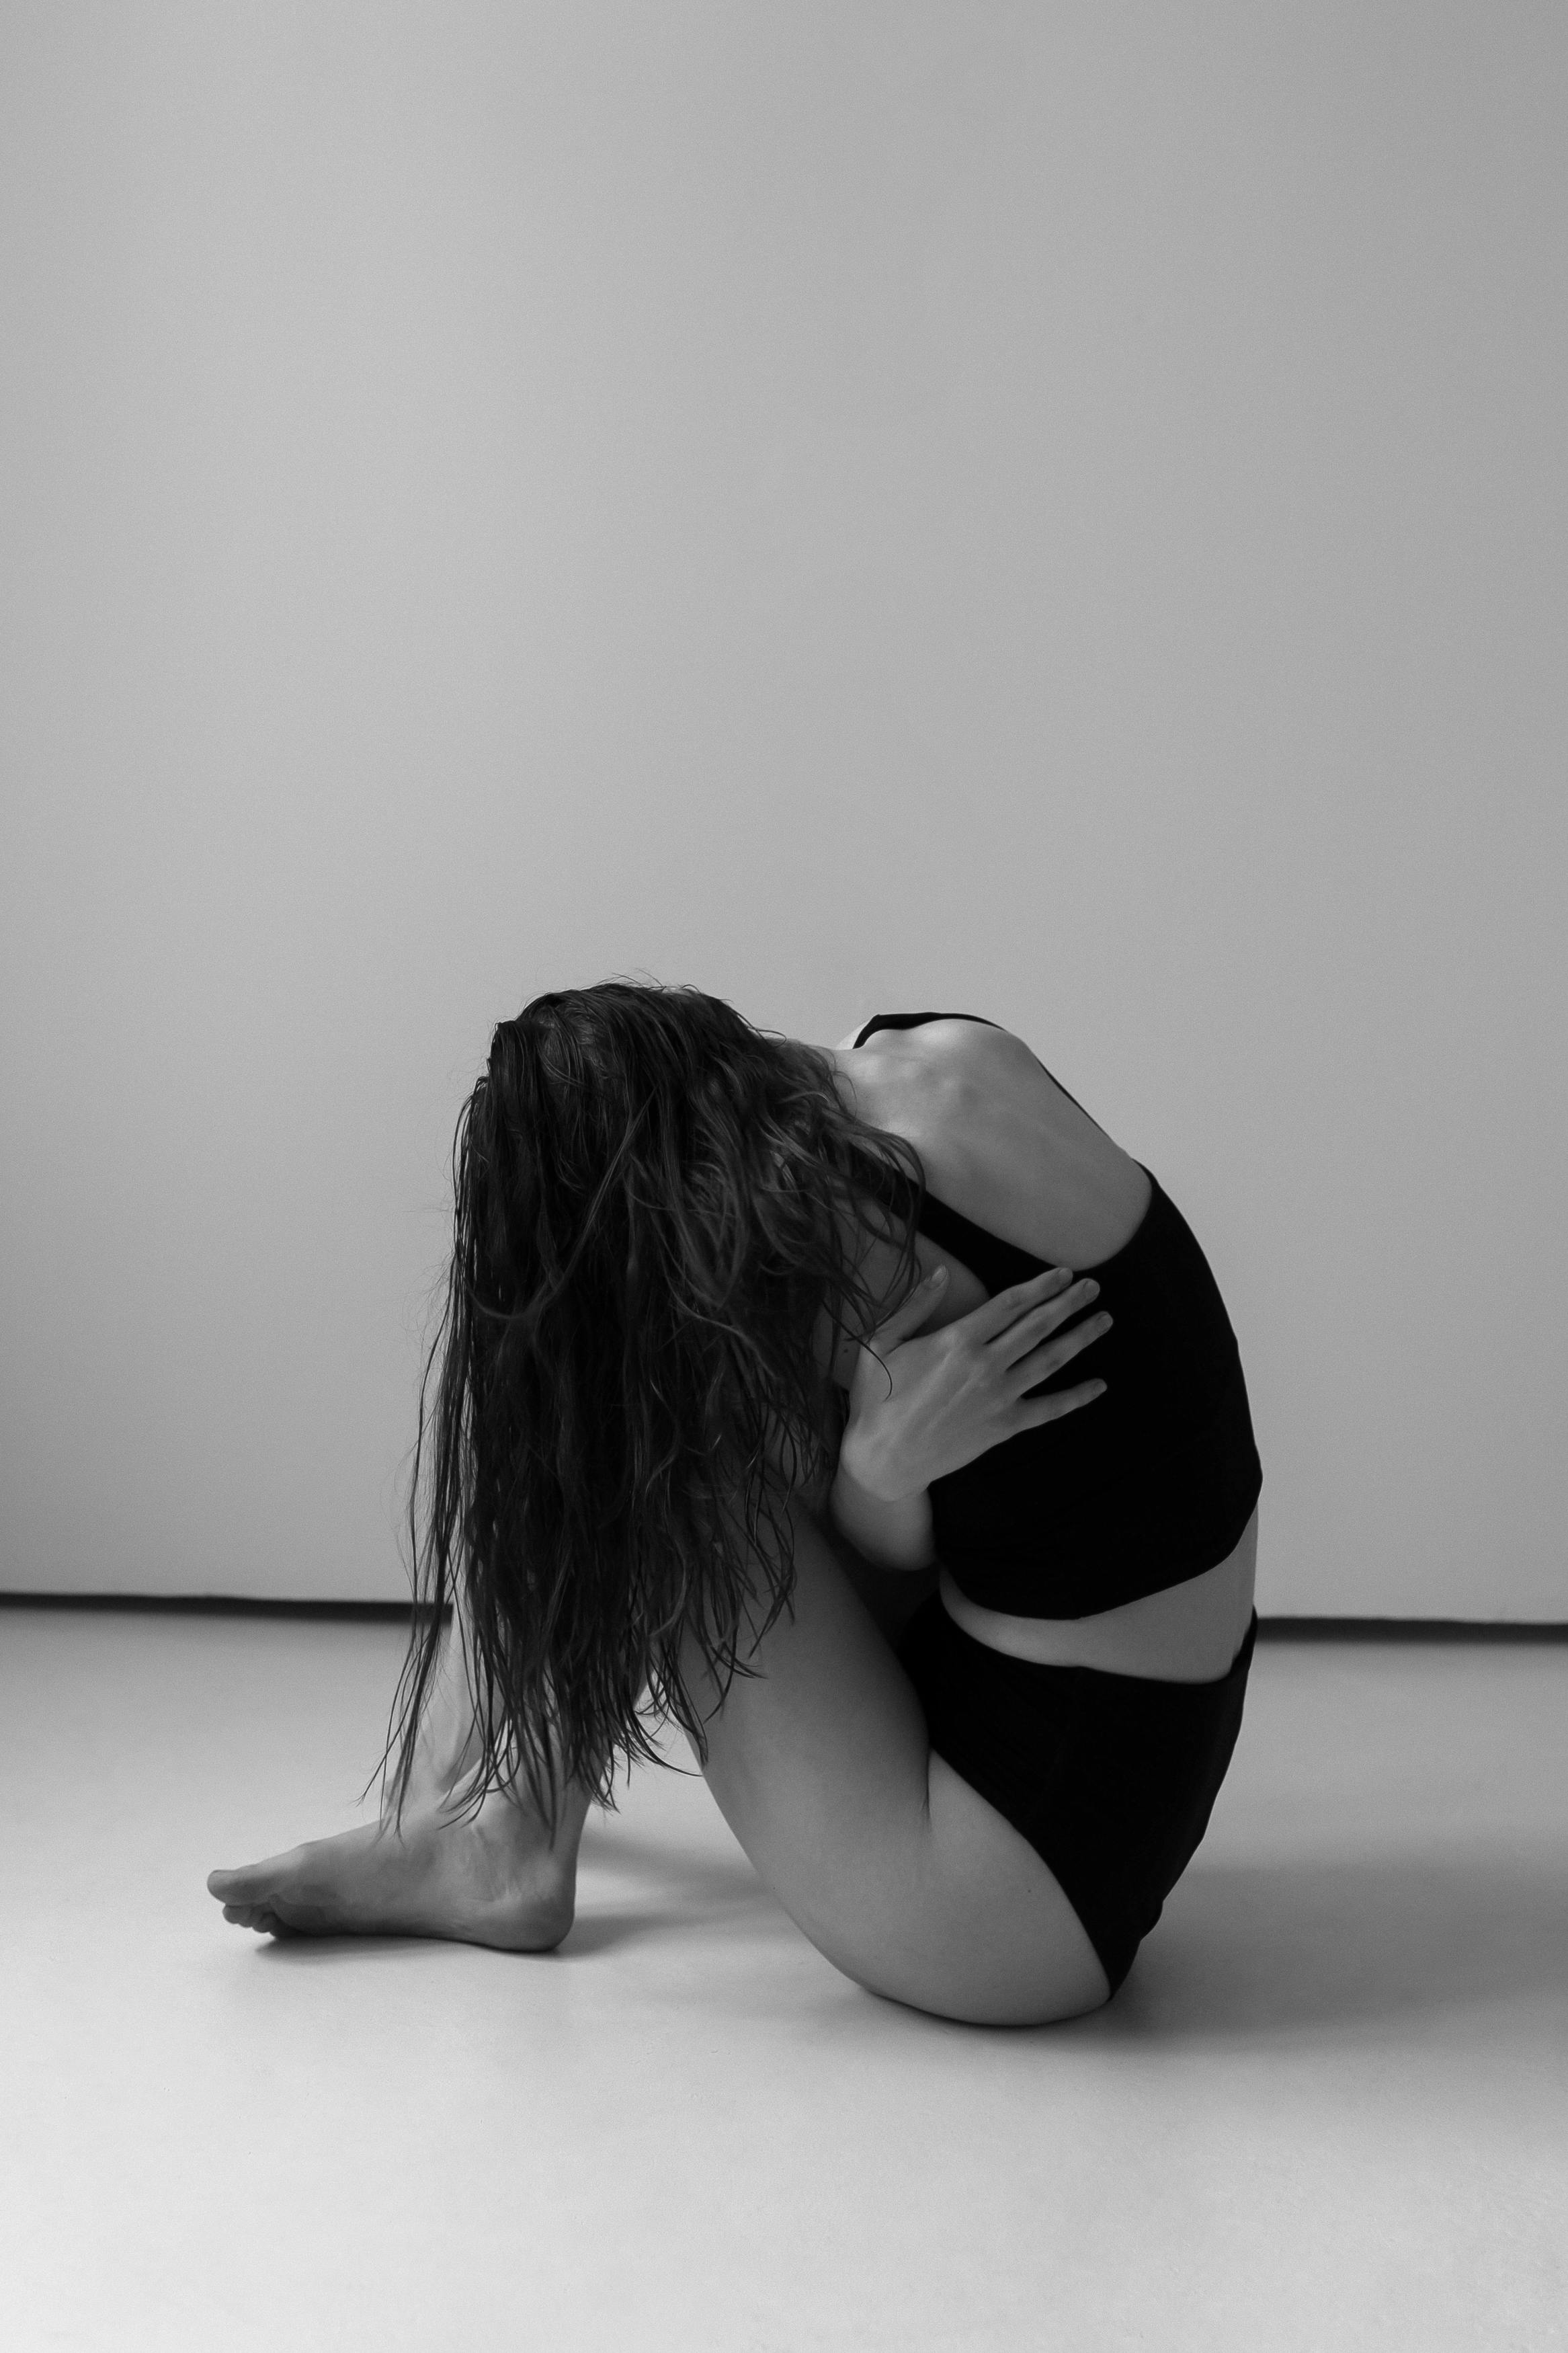 side view shot of a woman sitting on the floor while hugging herself